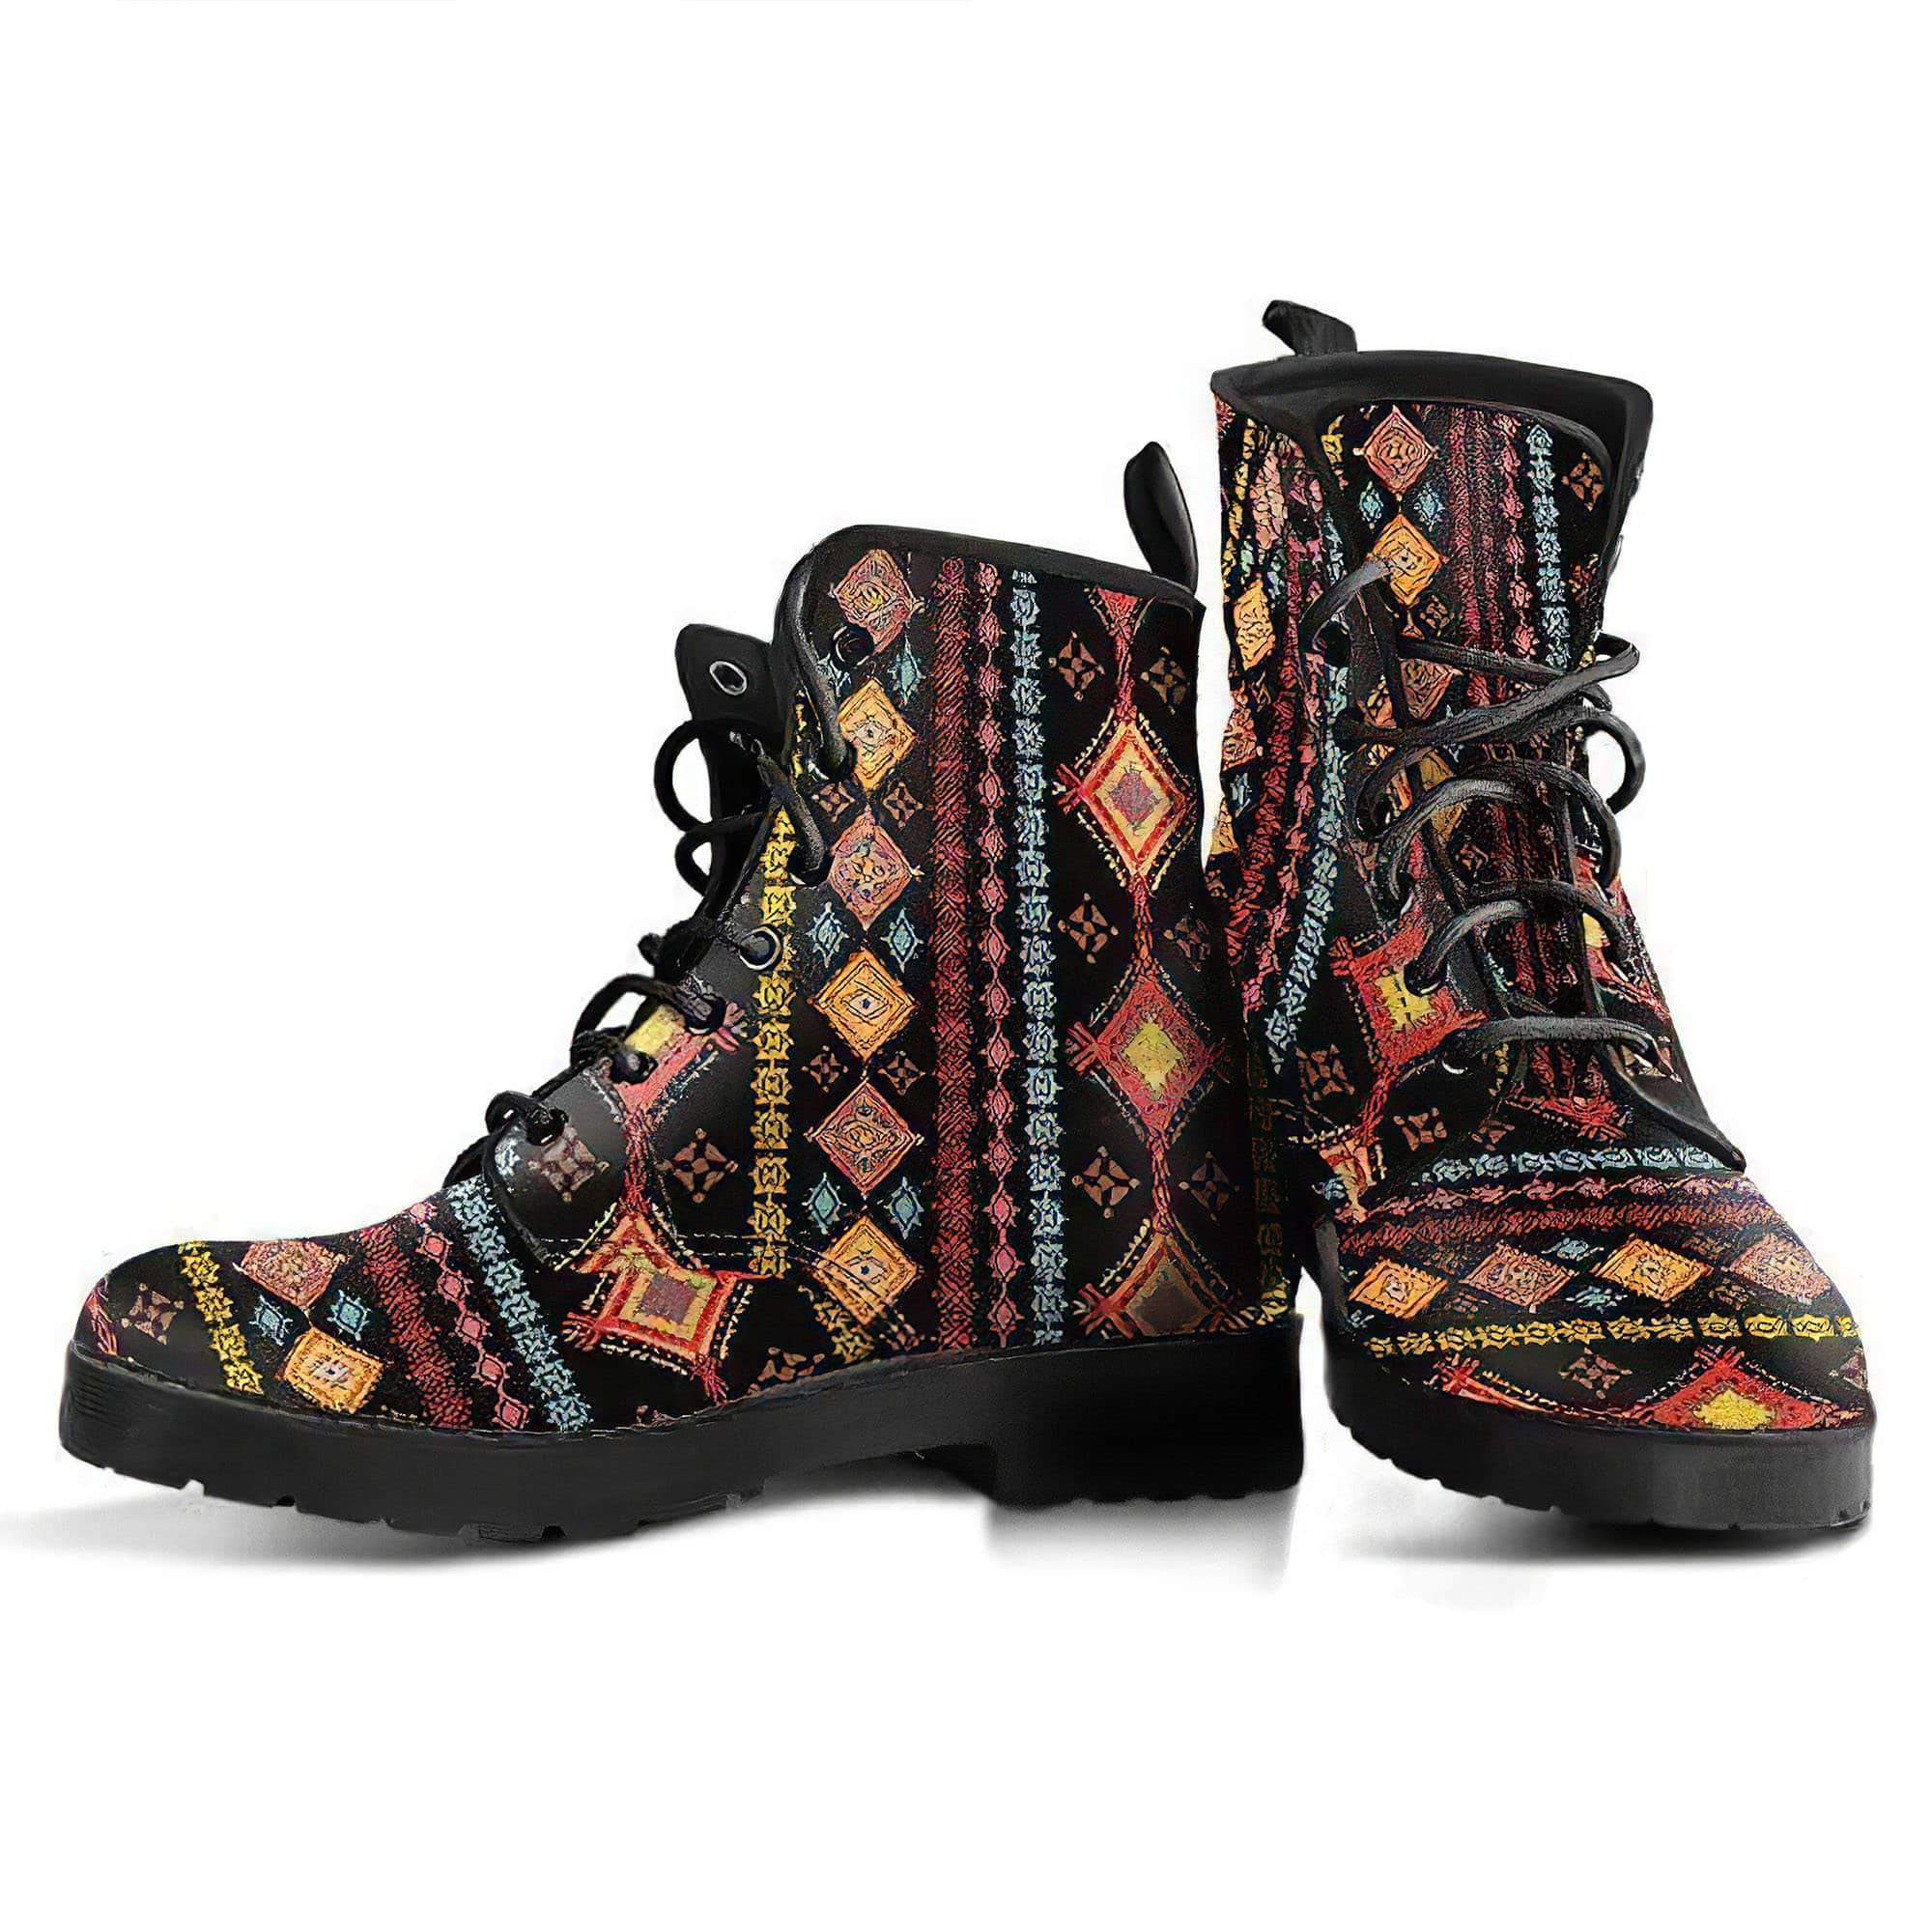 tribal-pattern-handcrafted-boots-women-s-leather-boots-12051969572925.jpg